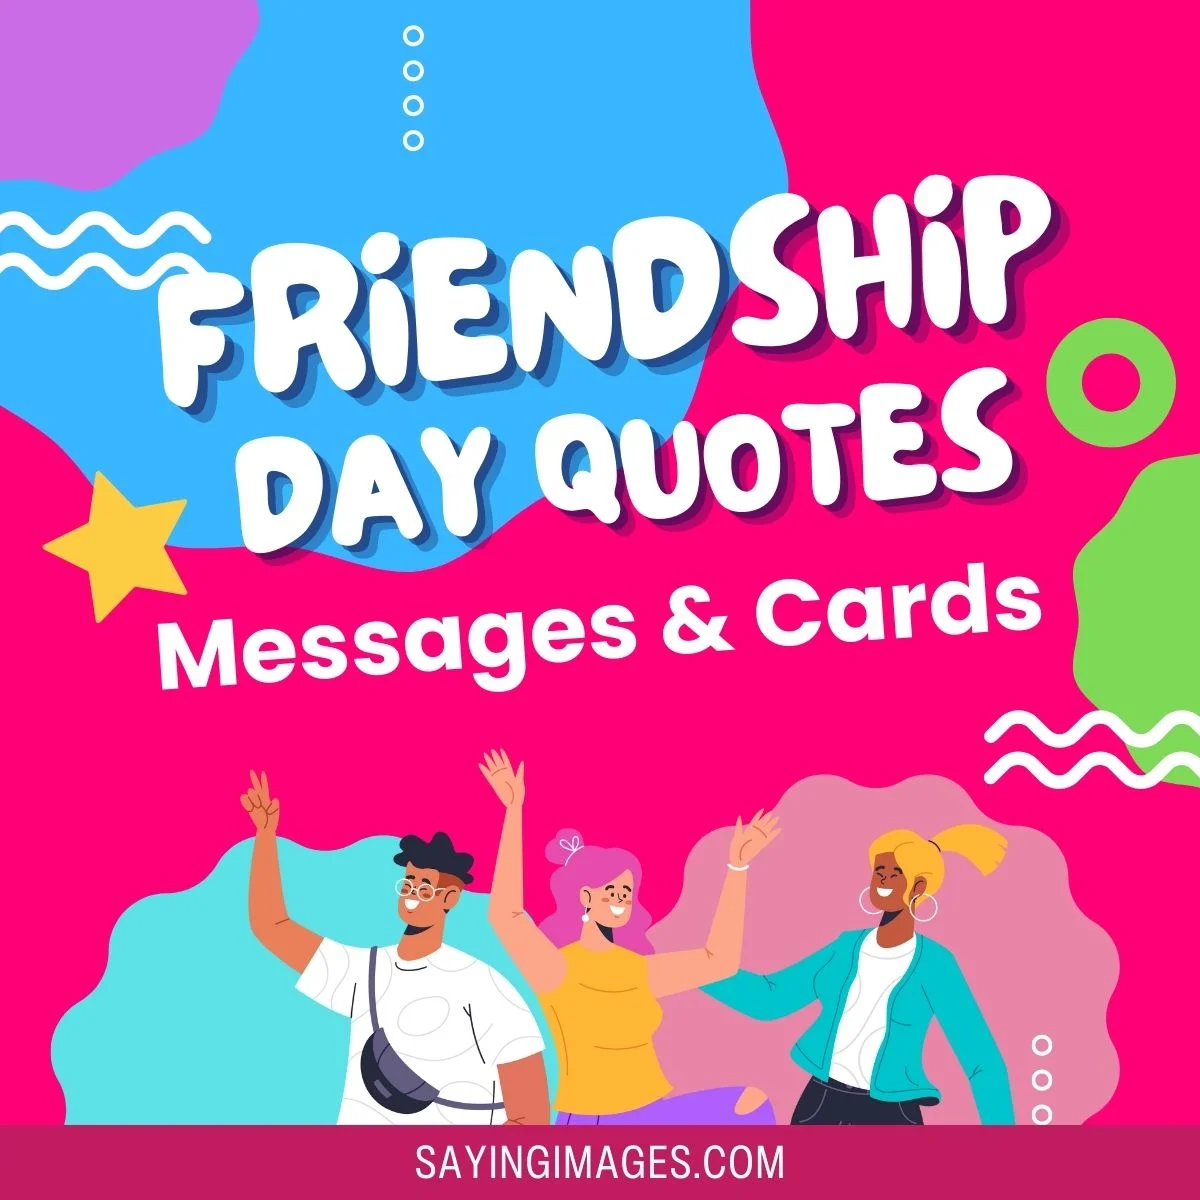 Friendship Day Quotes, Messages & Cards